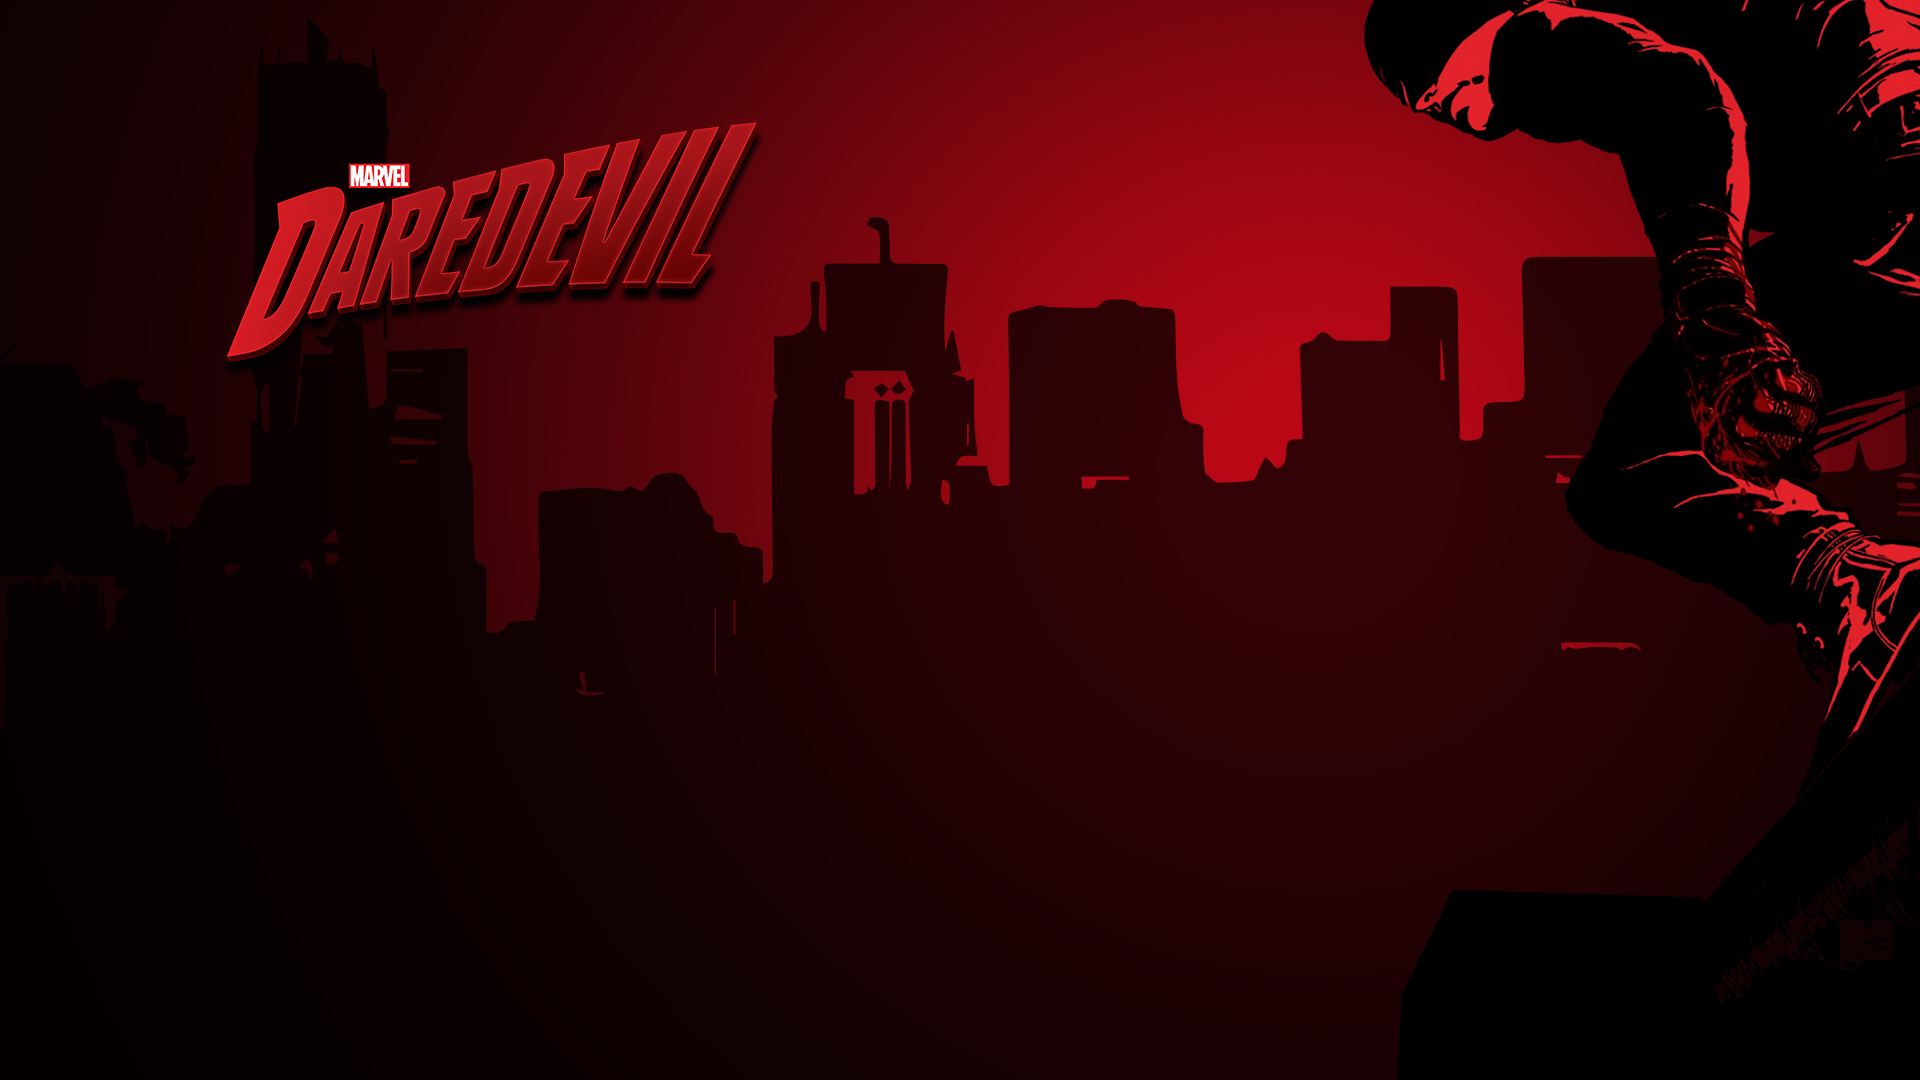 Marvel Daredevil Tv Show, HD Tv Shows, 4k Wallpaper, Image, Background, Photo and Picture